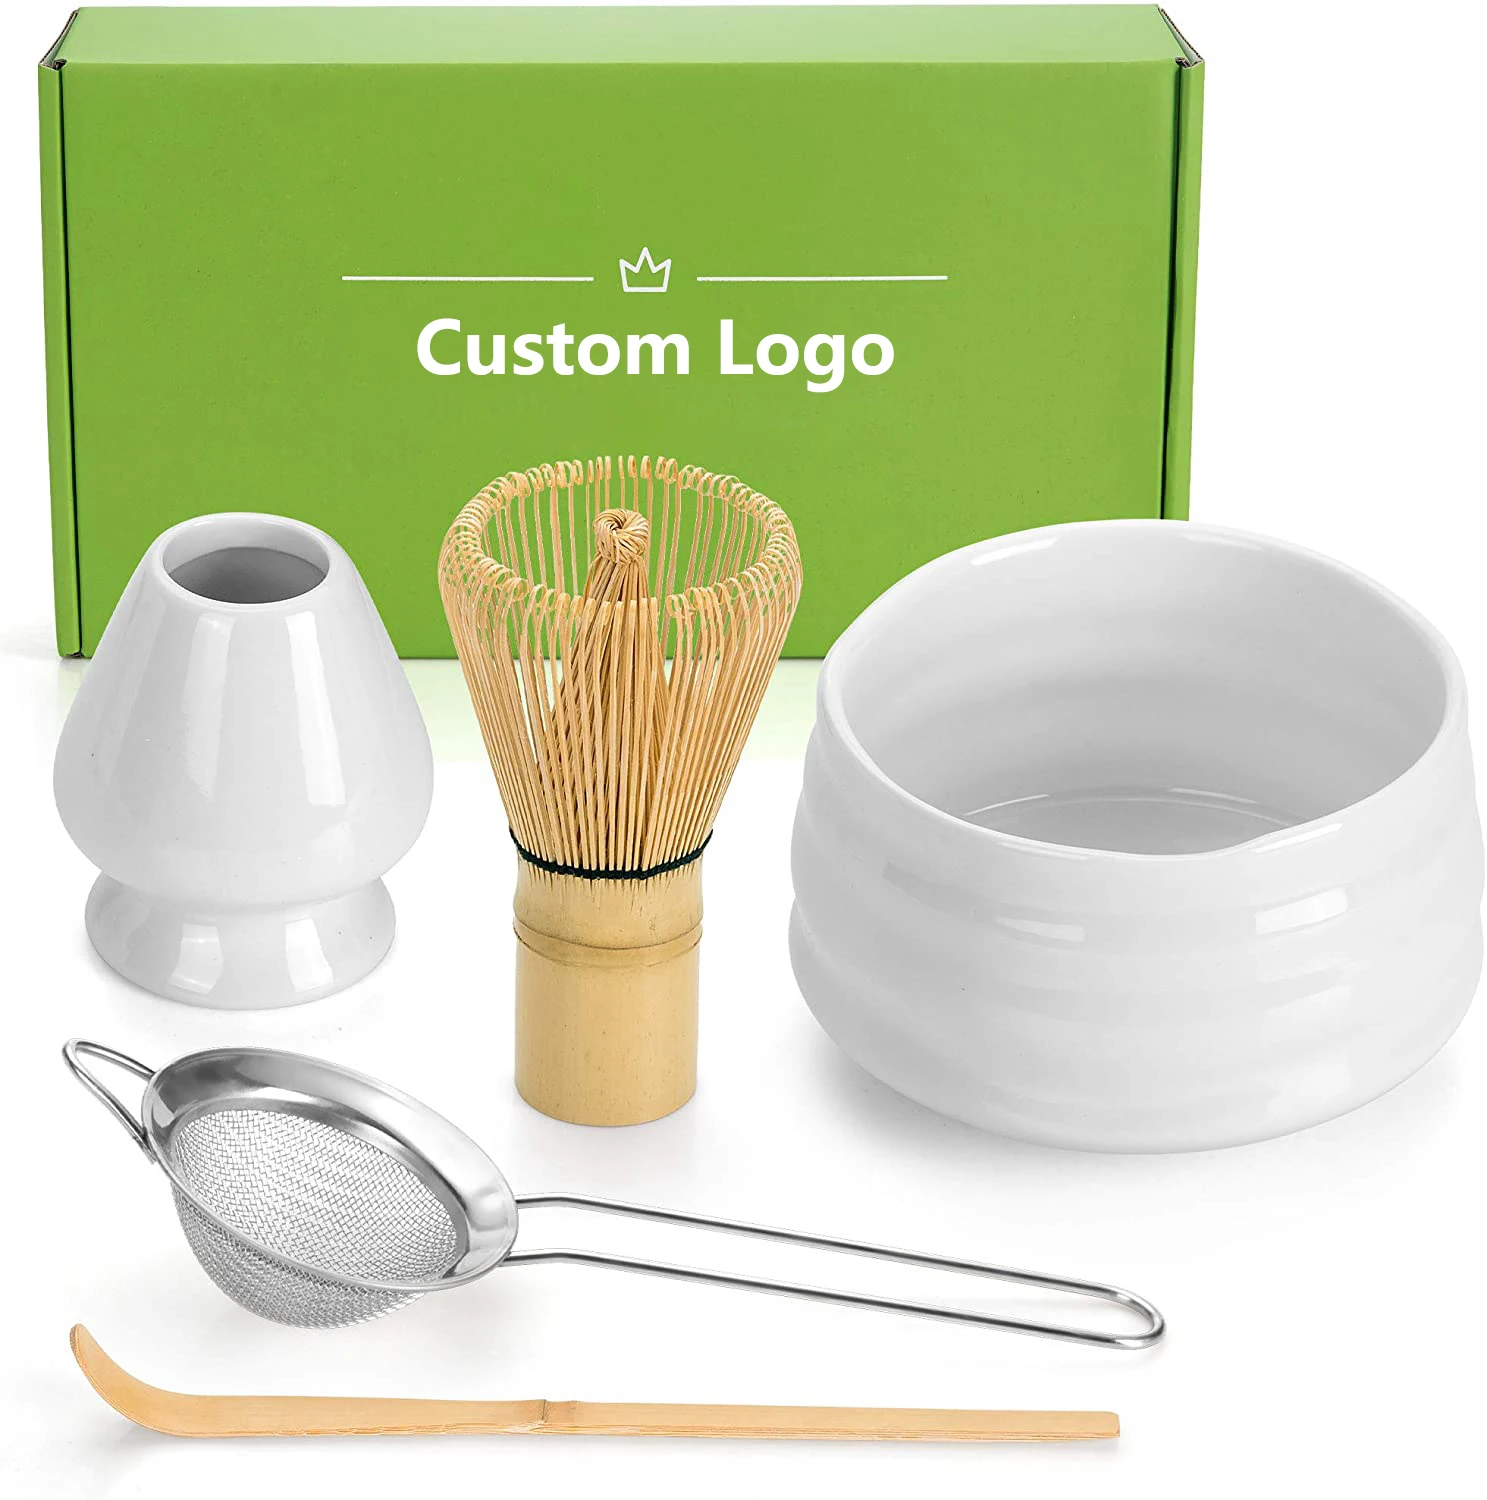 

Tiitee Wholesale Handmade Matcha Ceremony Kit With Matcha Whisk Traditional Bamboo Scoop Matcha Bowl Ceramic Whisk Holder, Natural bamboo color